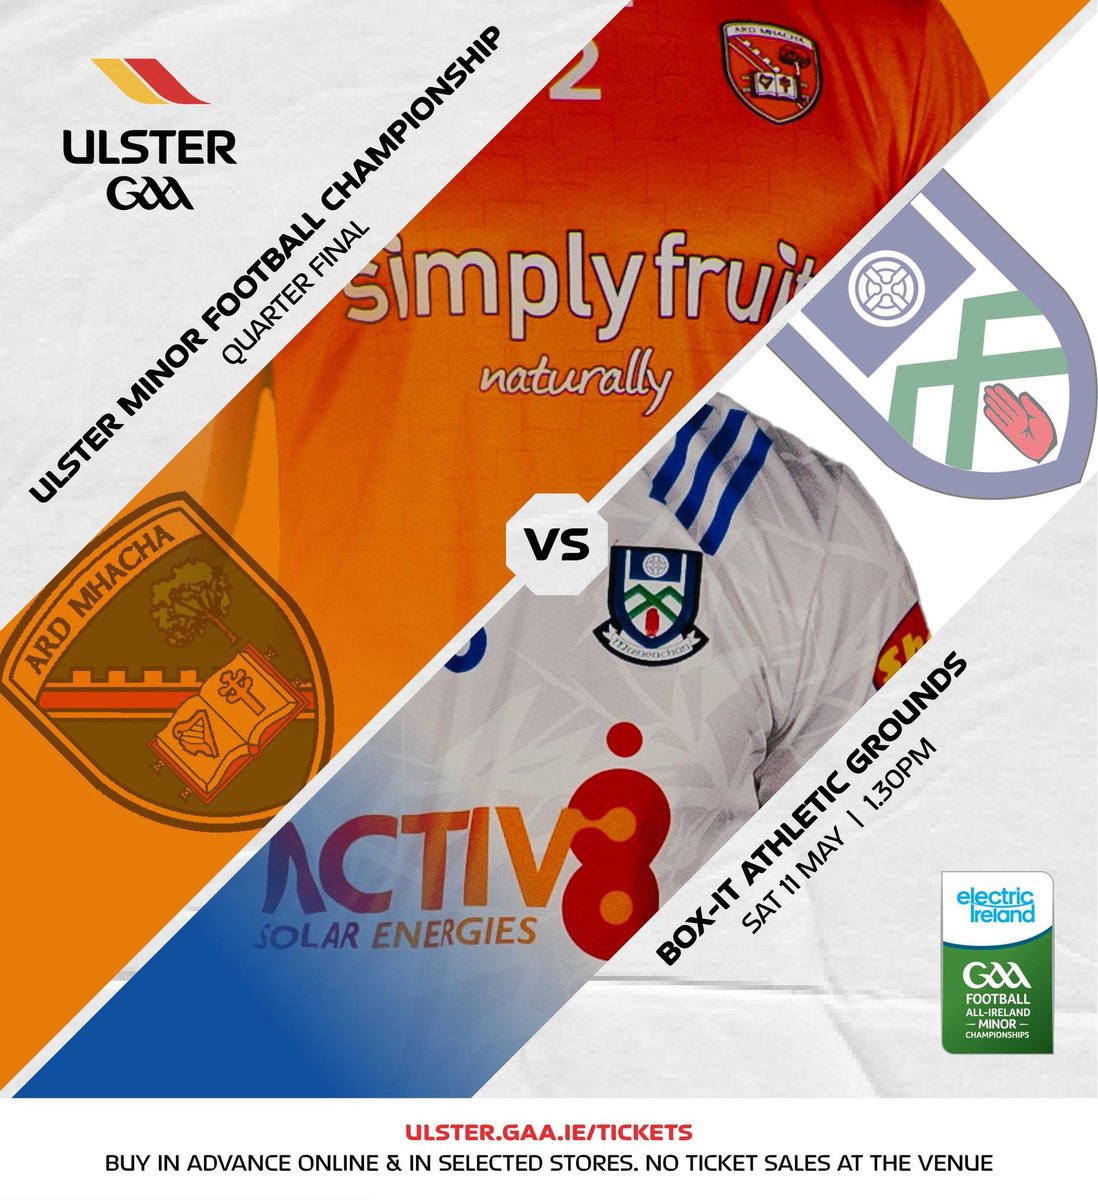 2024 @ElectricIreland Ulster Minor Football Championship Quarter Final🏐 Our minors take on Monaghan at home tomorrow! Sat 11 May 1.30pm Box-It Athletic Grounds, Armagh 🎟️ Buy tickets in advance online. No sales at venue ➡️ universe.com/host/events/el… #Ulster2024 #ThisIsMajor